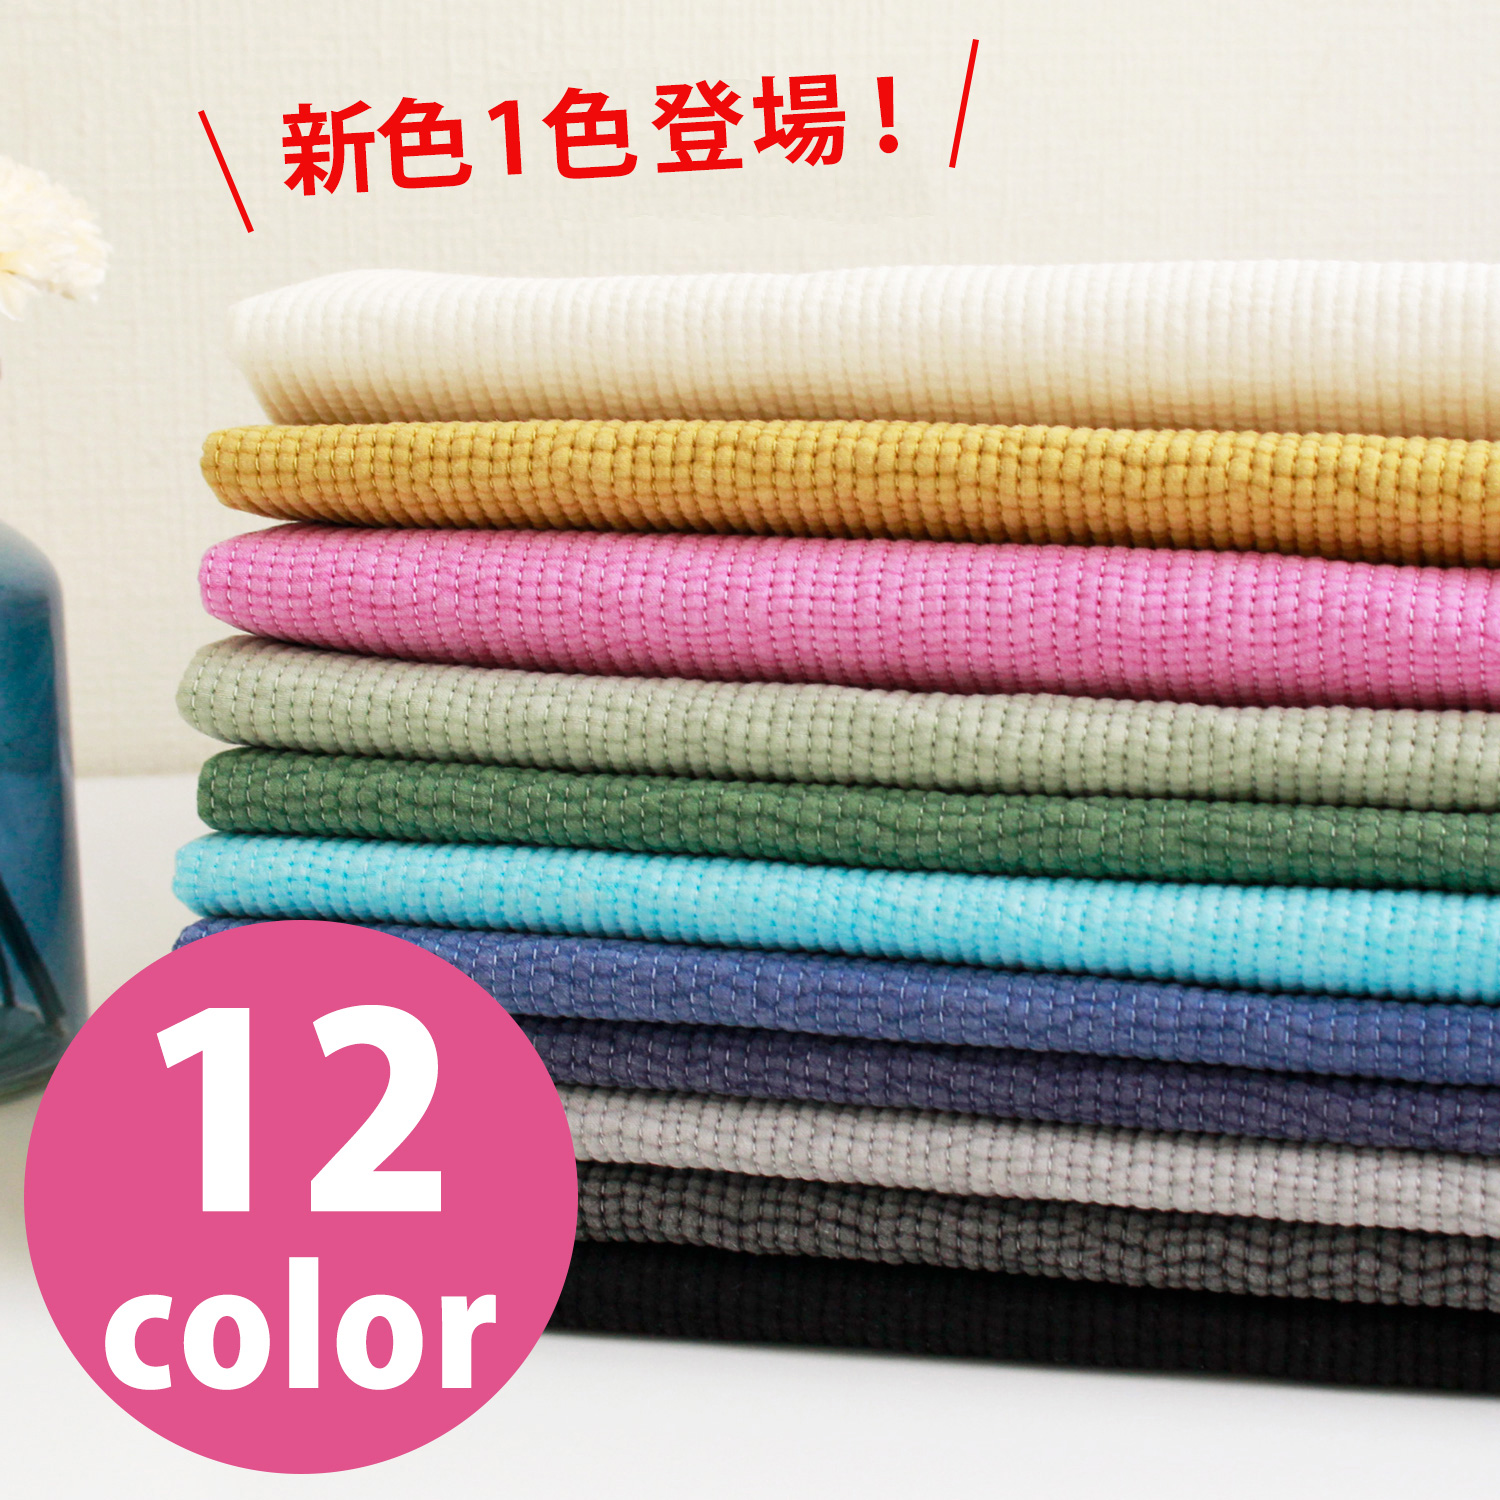 ■NBY303R　Quilting Fabric　Quilting width 3mm size approx"",8m roll (roll)